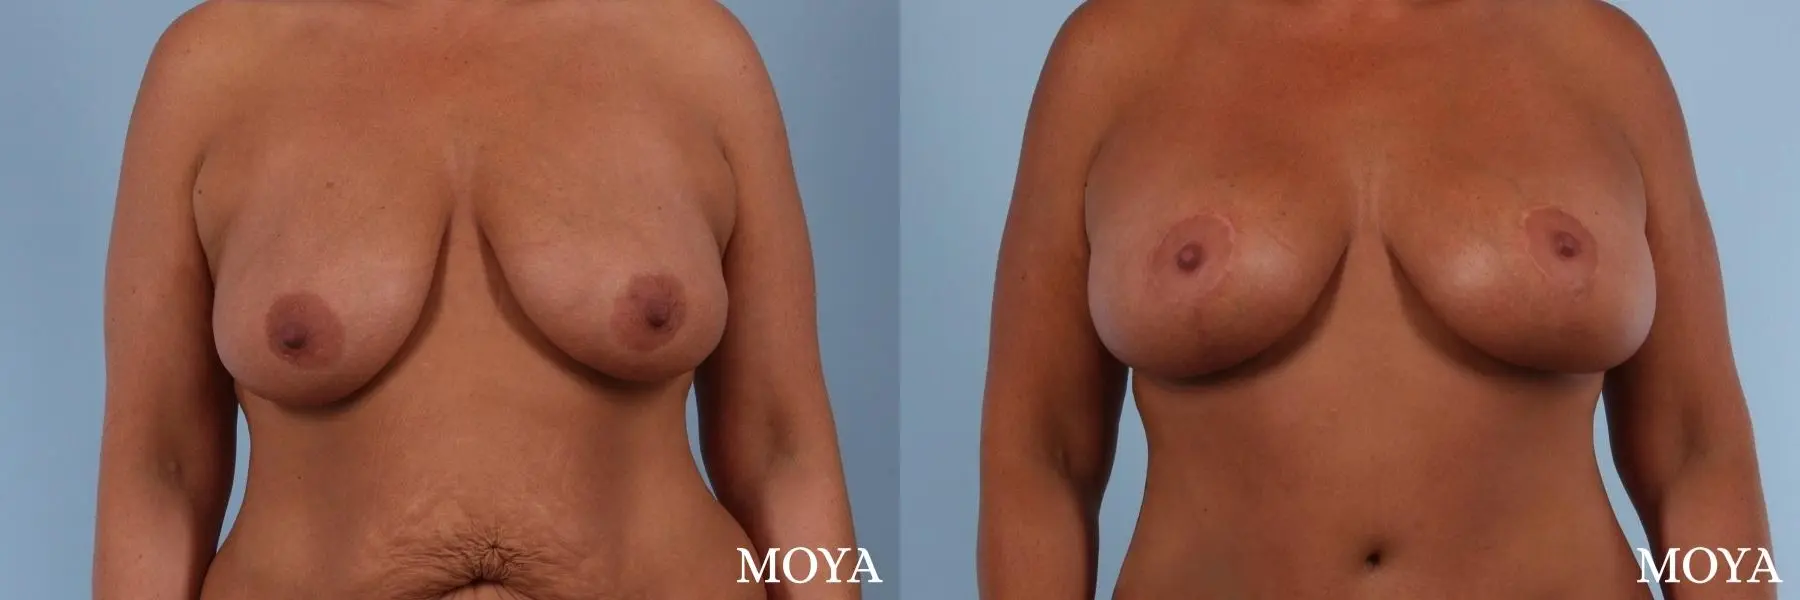 Breast Augmentation With Lift: Patient 8 - Before and After  